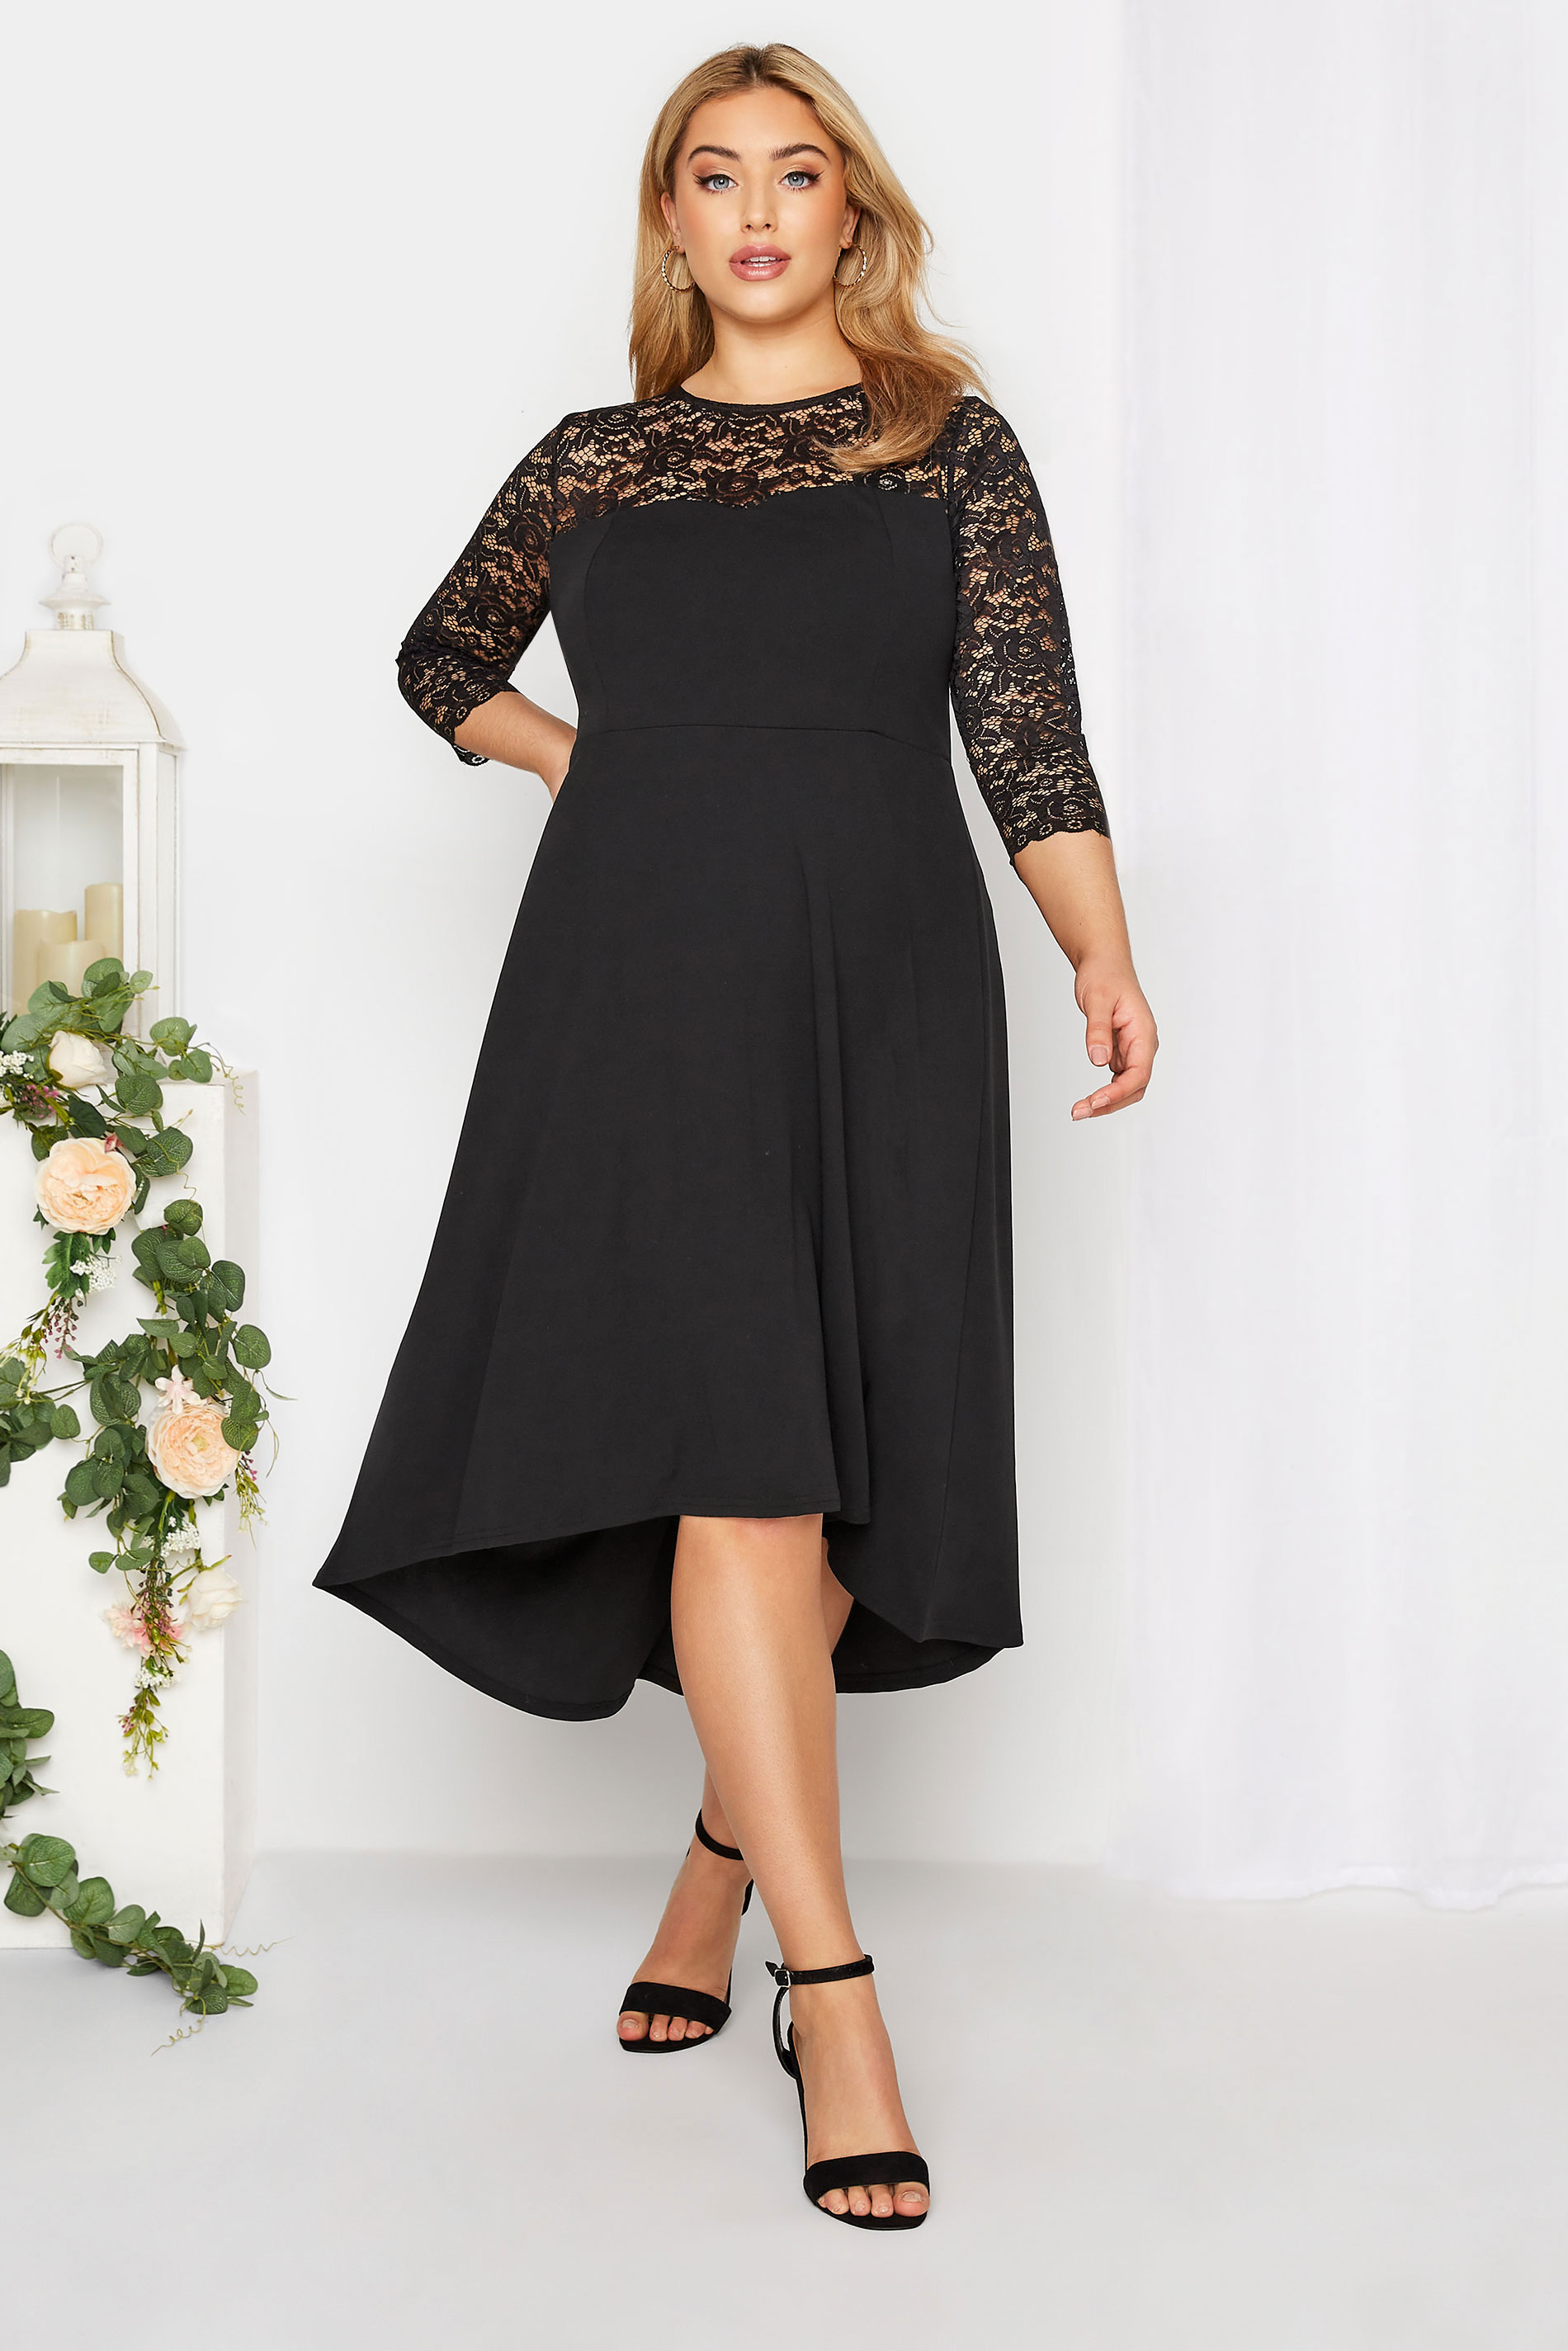 Robes Grande Taille Grande taille  Robes Dentelles | YOURS LONDON - Robe Noire Midi Encolure & Manches Dentelle - SD53642